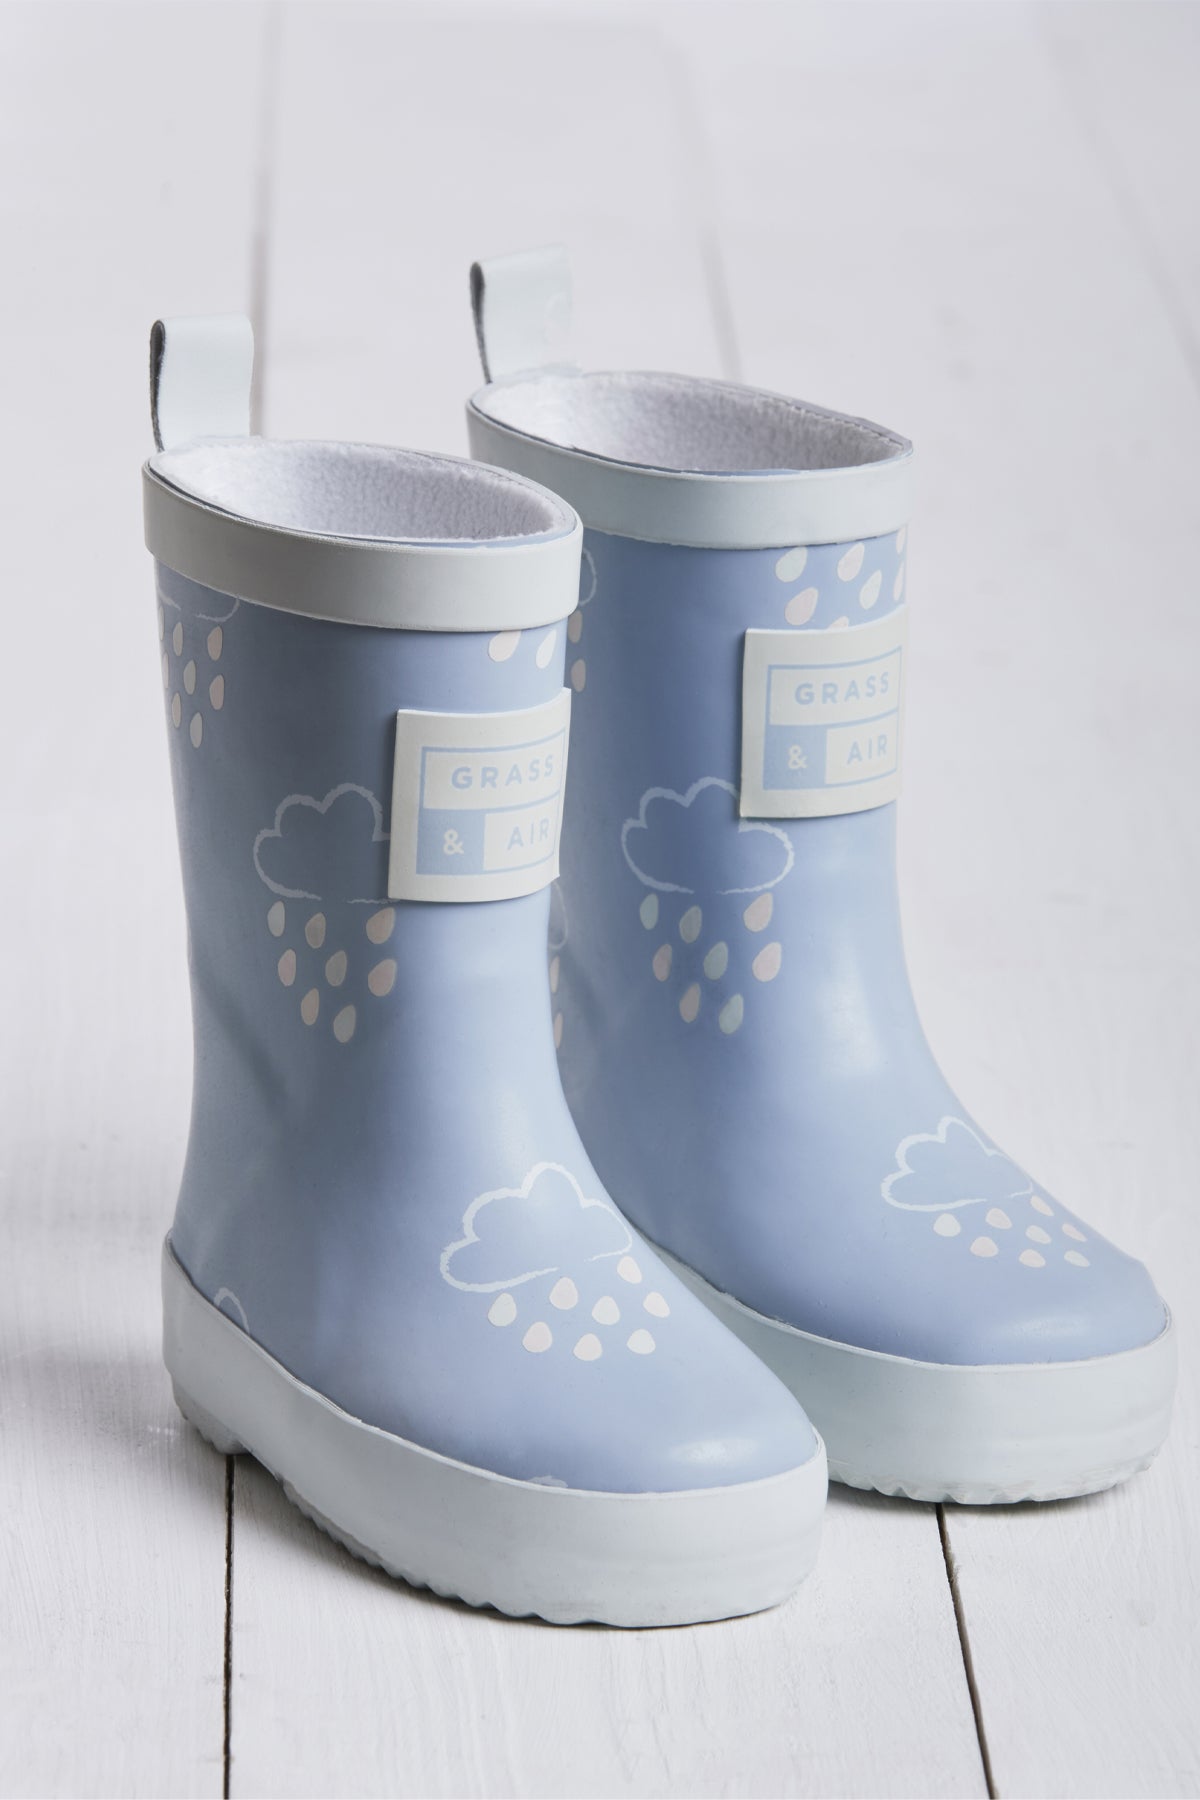 GRASS & AIR - Infant Colour Changing Wellies in Baby Blue